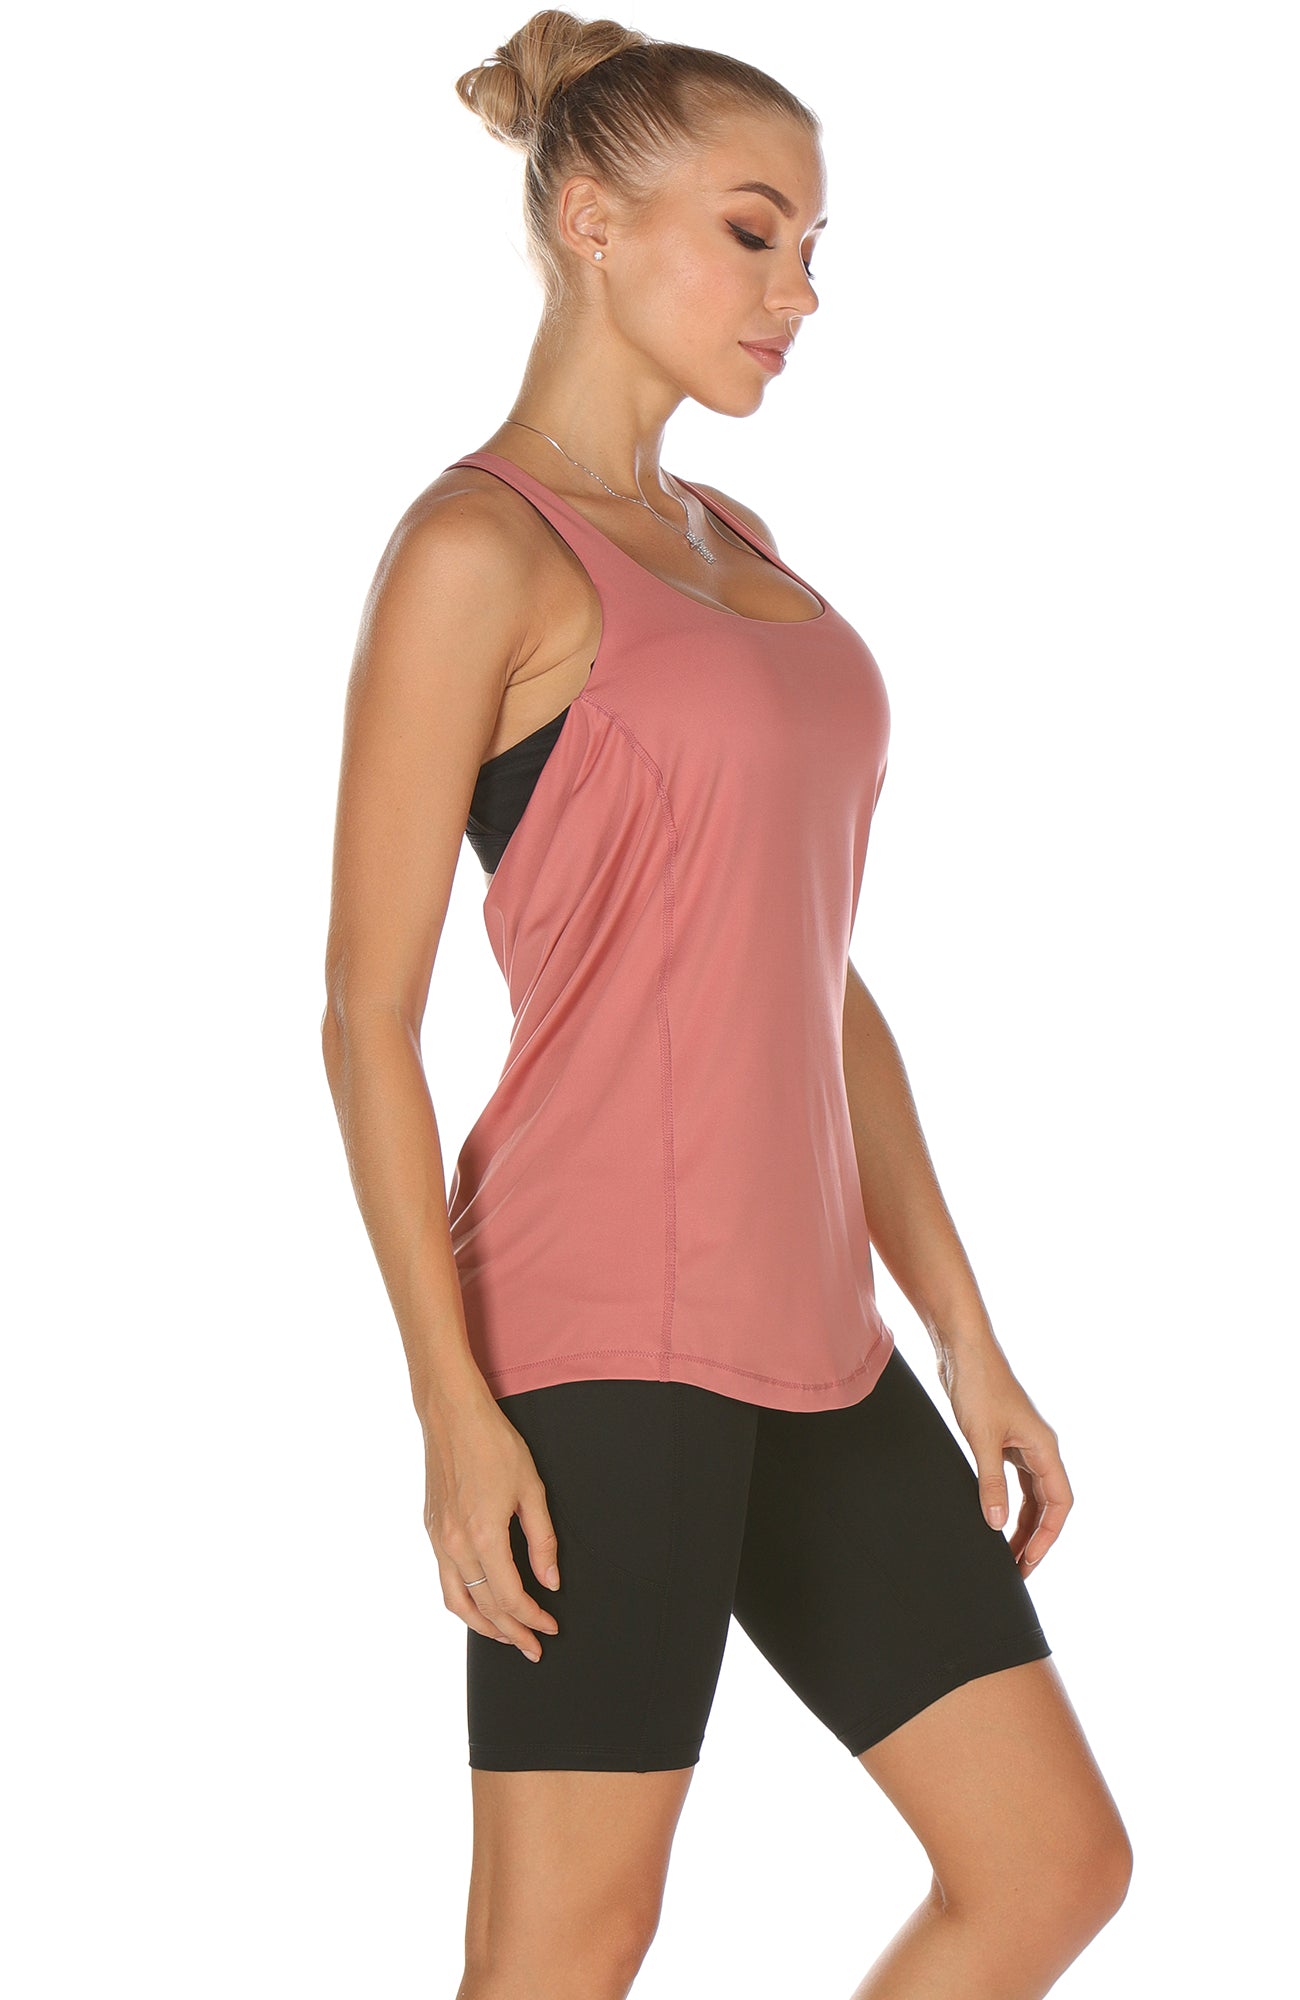 Workout Tanks with Built-in Bra